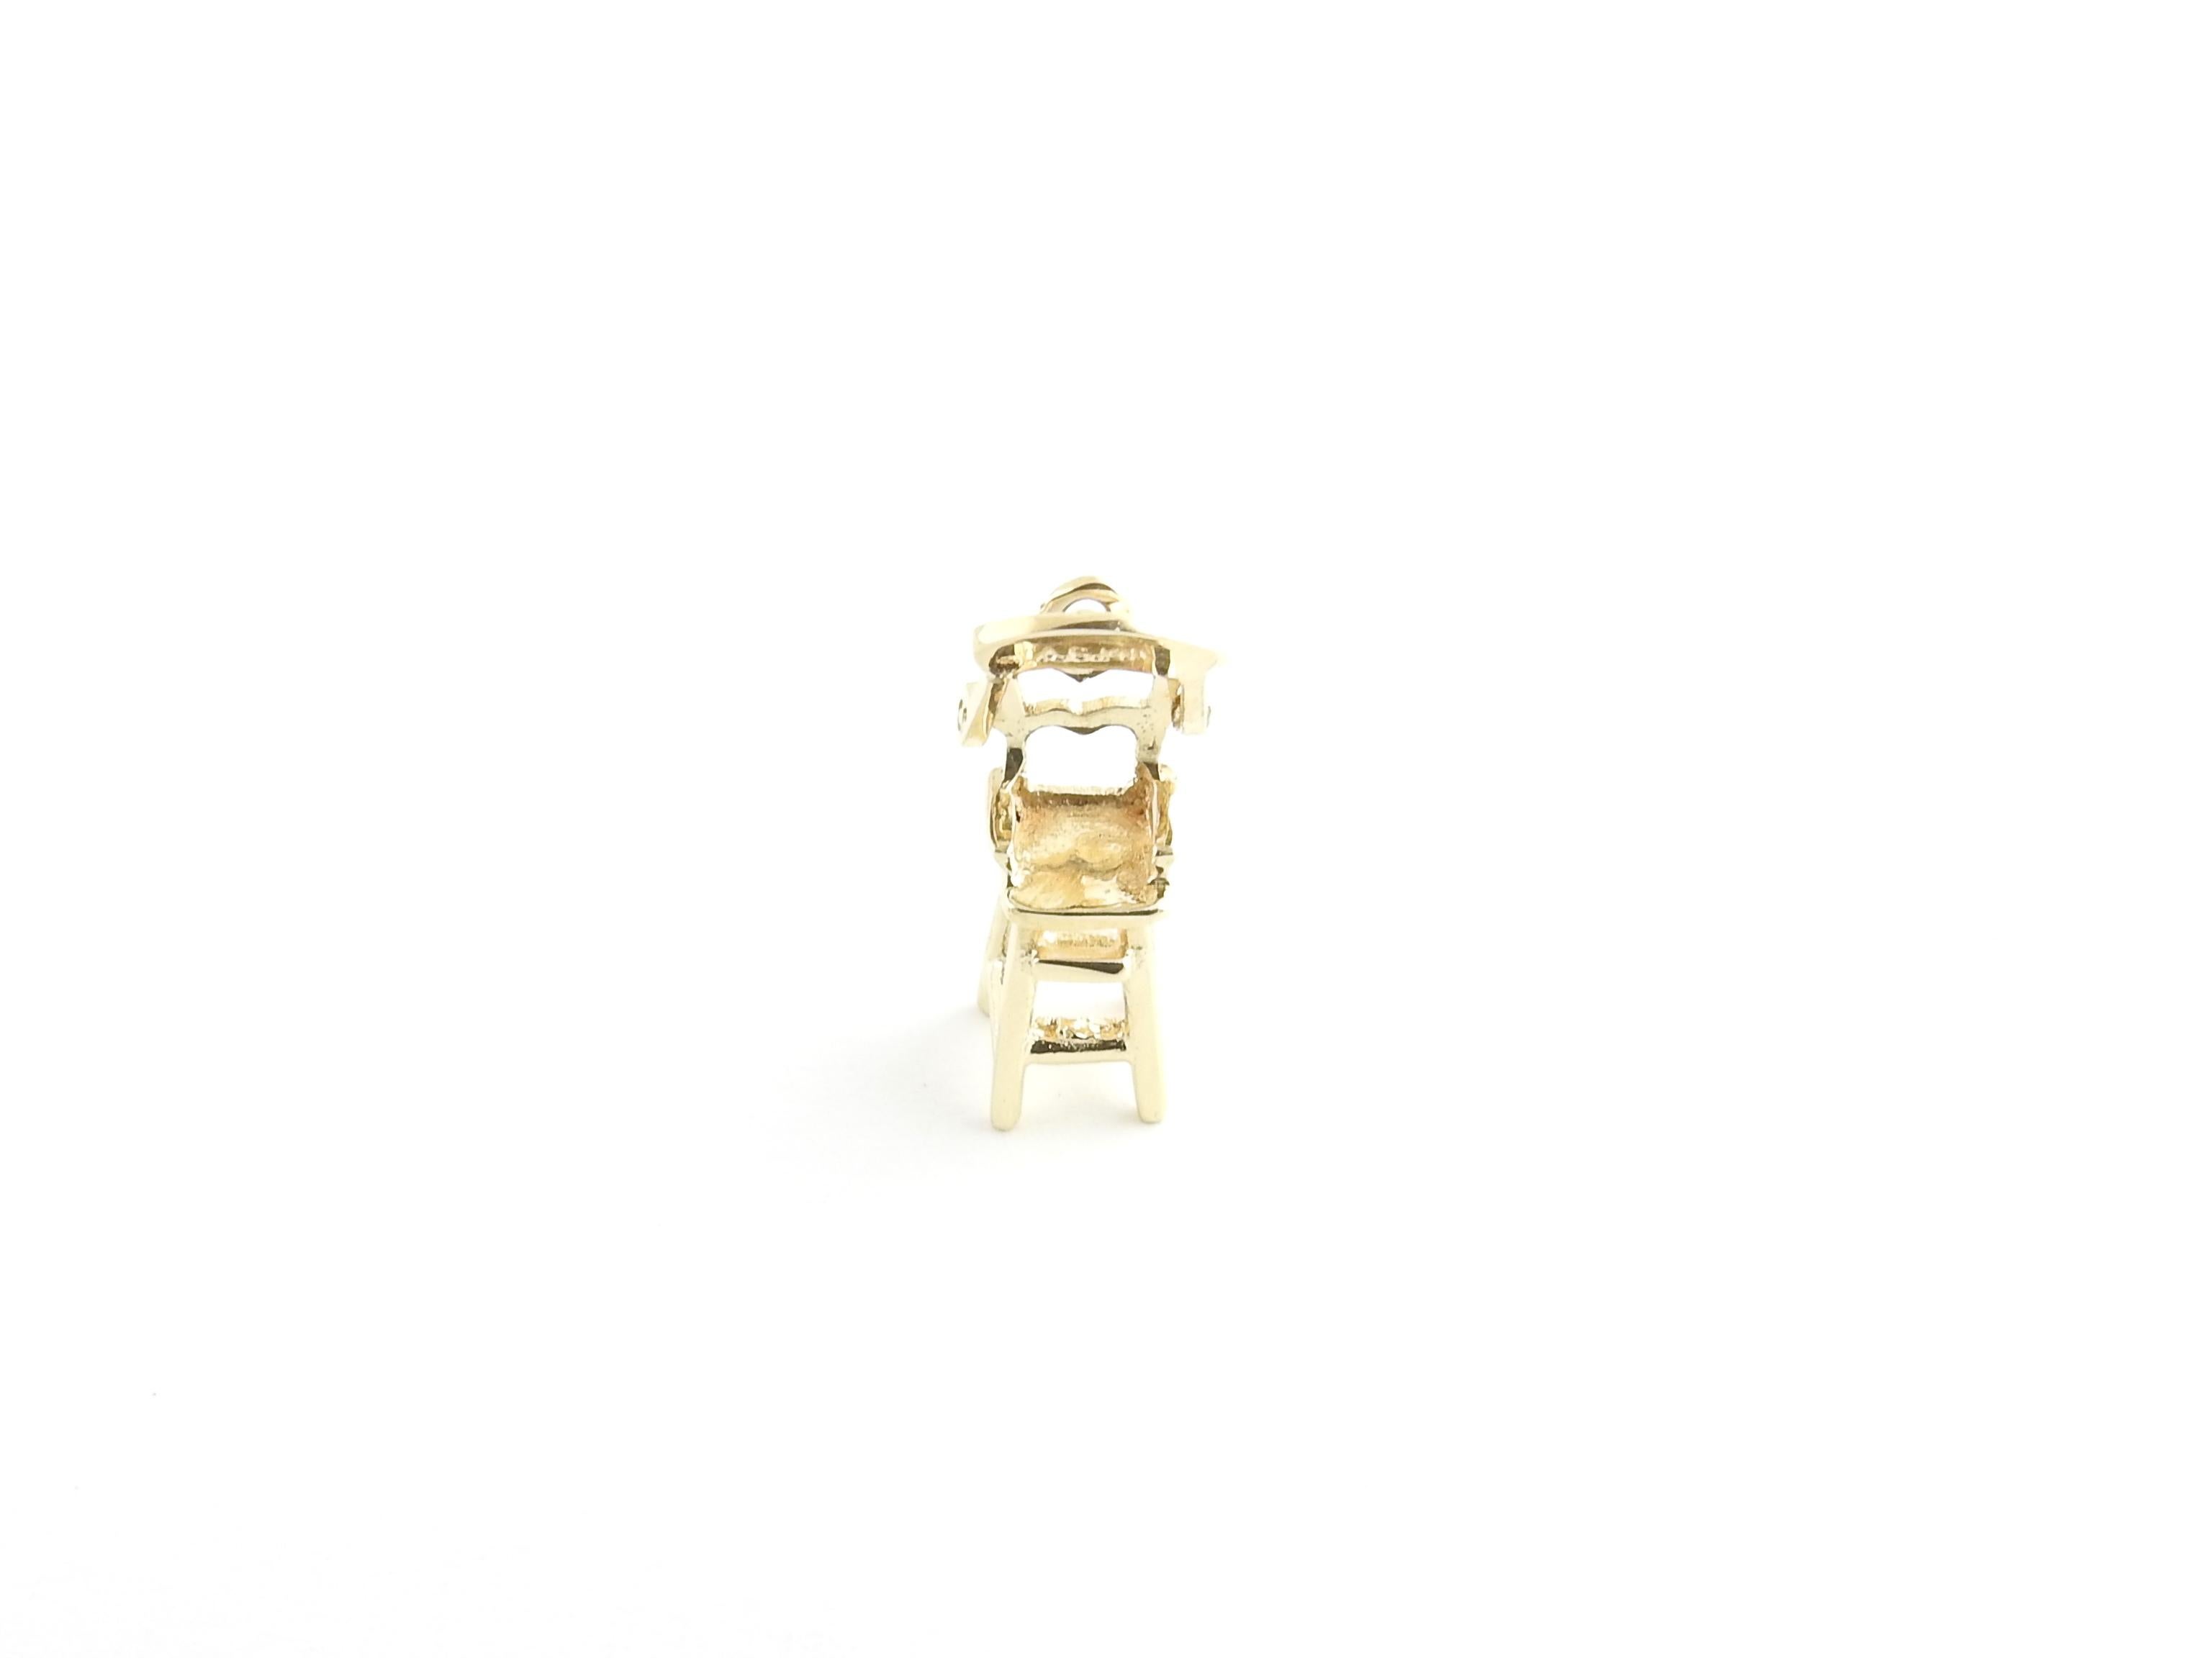 Vintage 14 Karat Yellow Gold Highchair Charm

This lovely 3D charm features a miniature highchair with hinged tray meticulously detailed in 14K yellow gold.

Size: 17 mm x 7 mm

Weight: 0.8 dwt. / 1.3 gr.

Stamped: A.C. 14K

Very good condition,